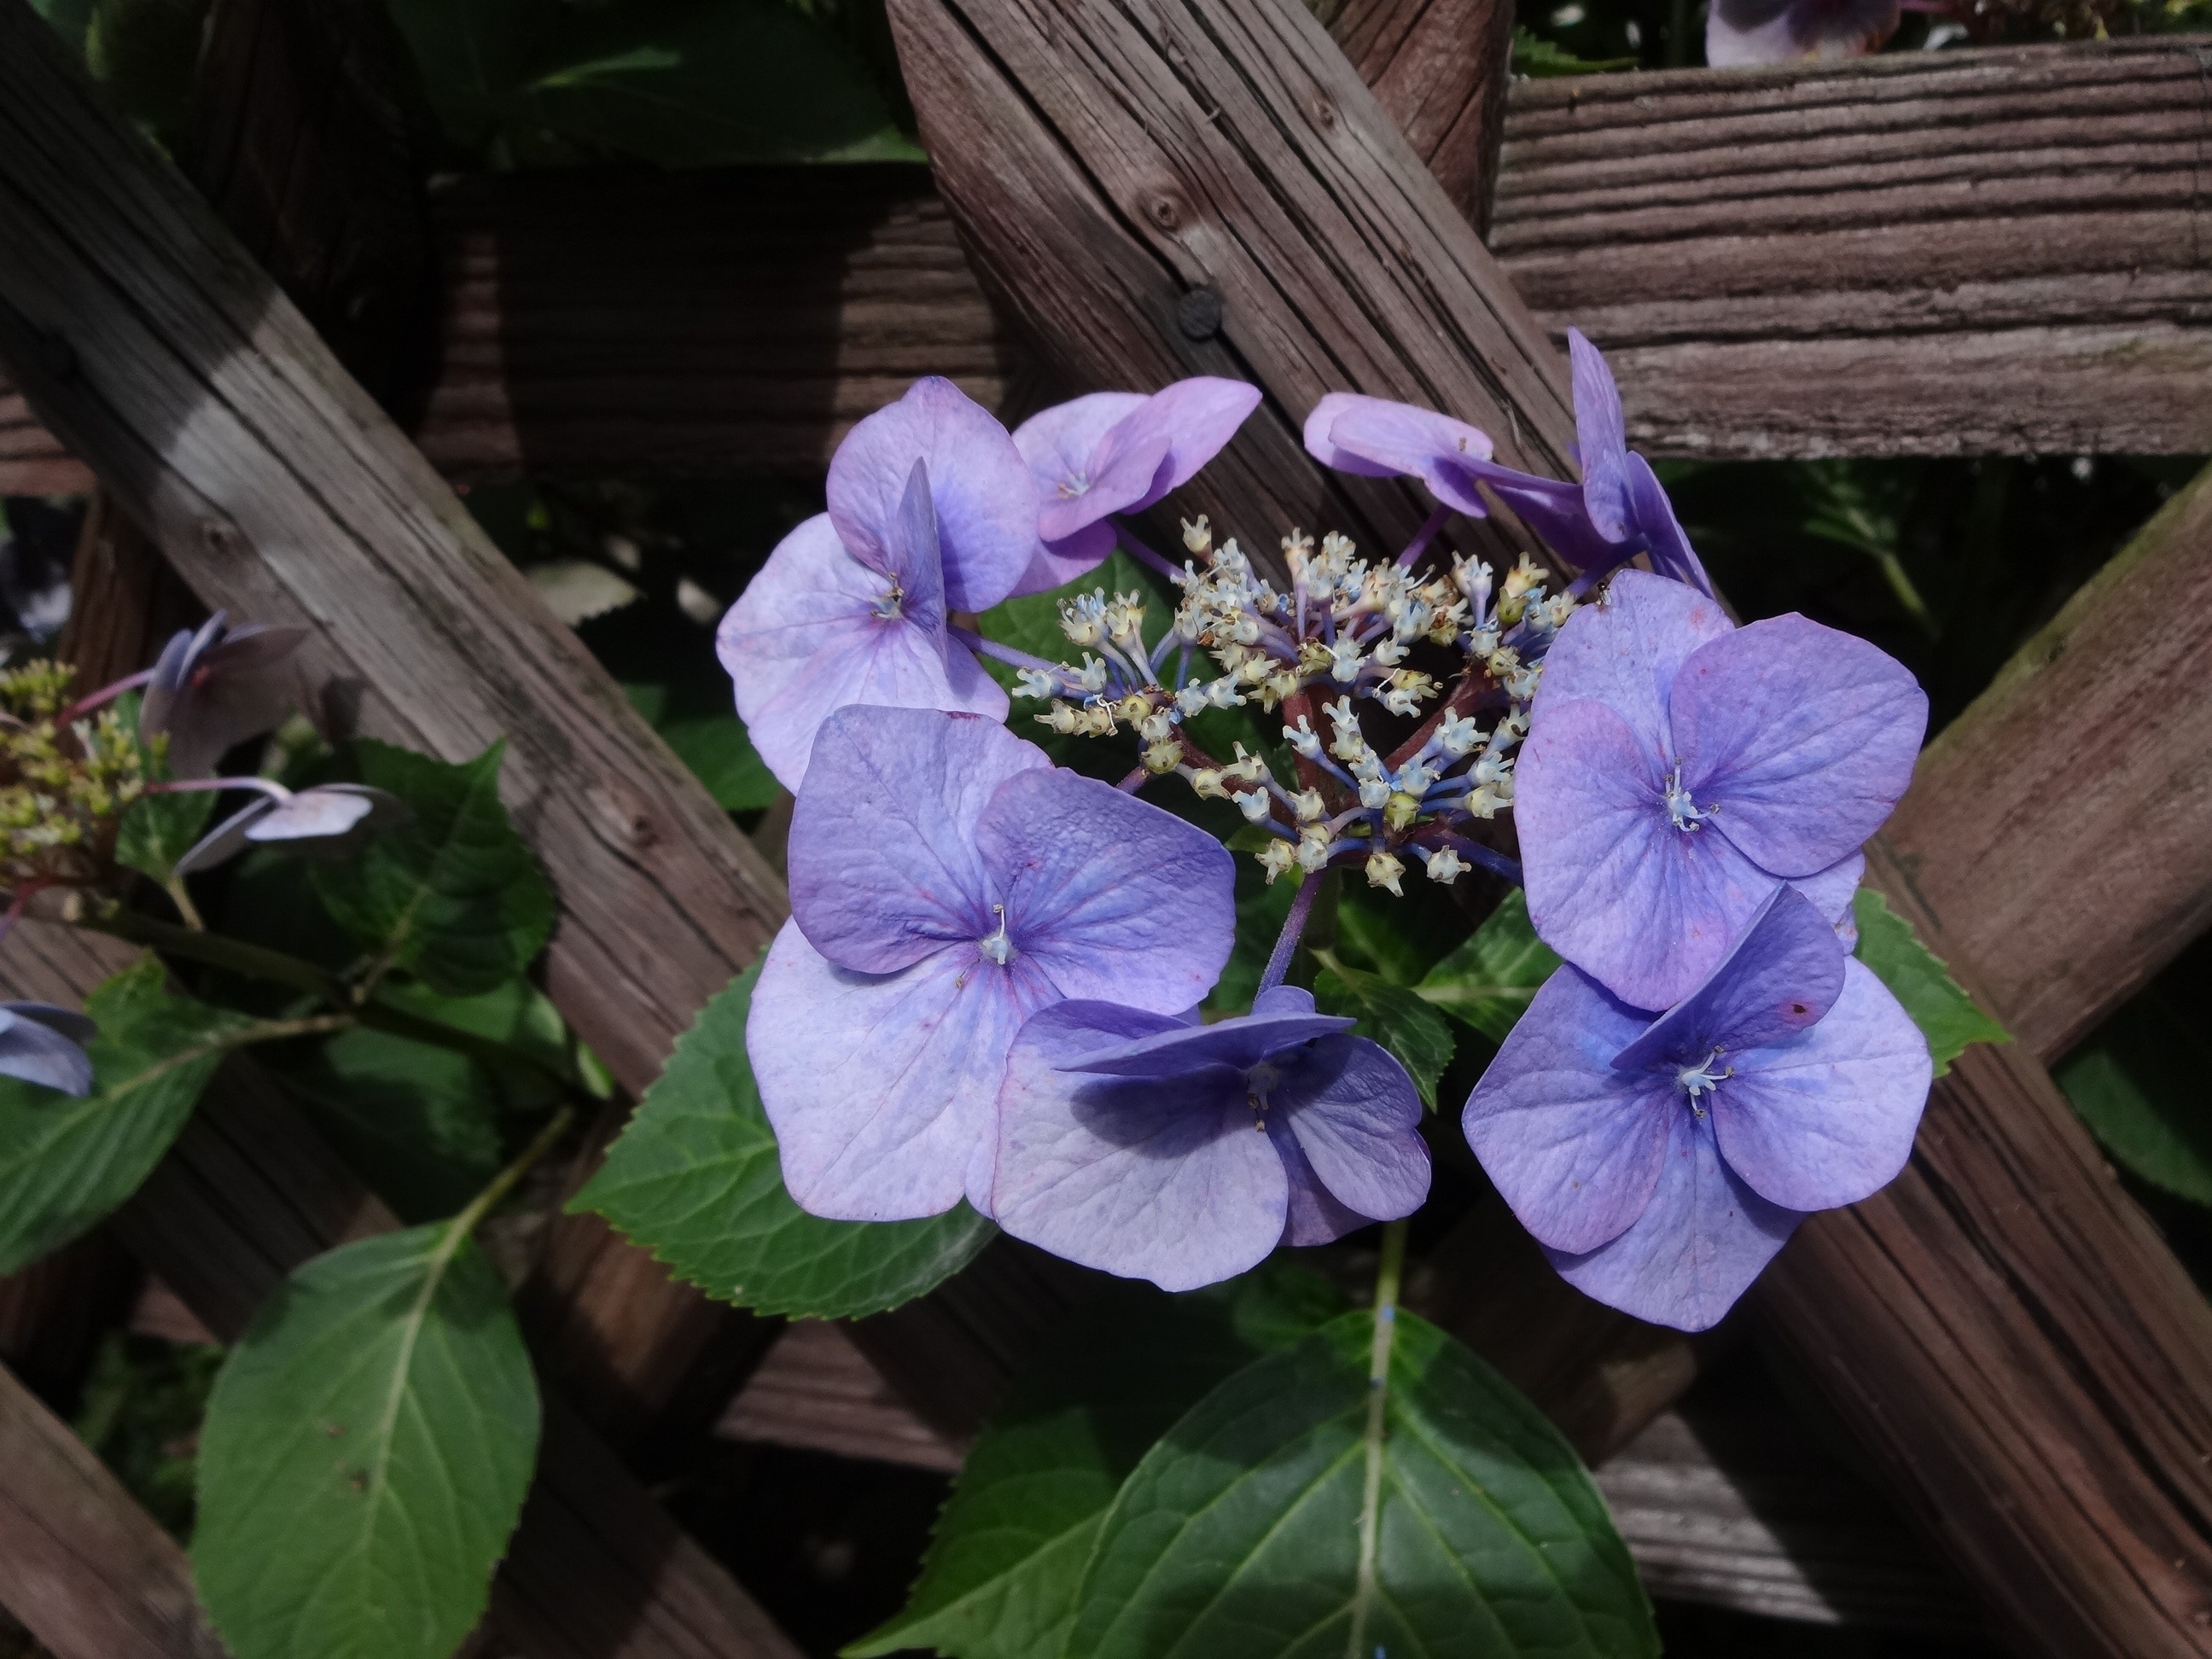 purple petal flower during daytime near brown wooden fence